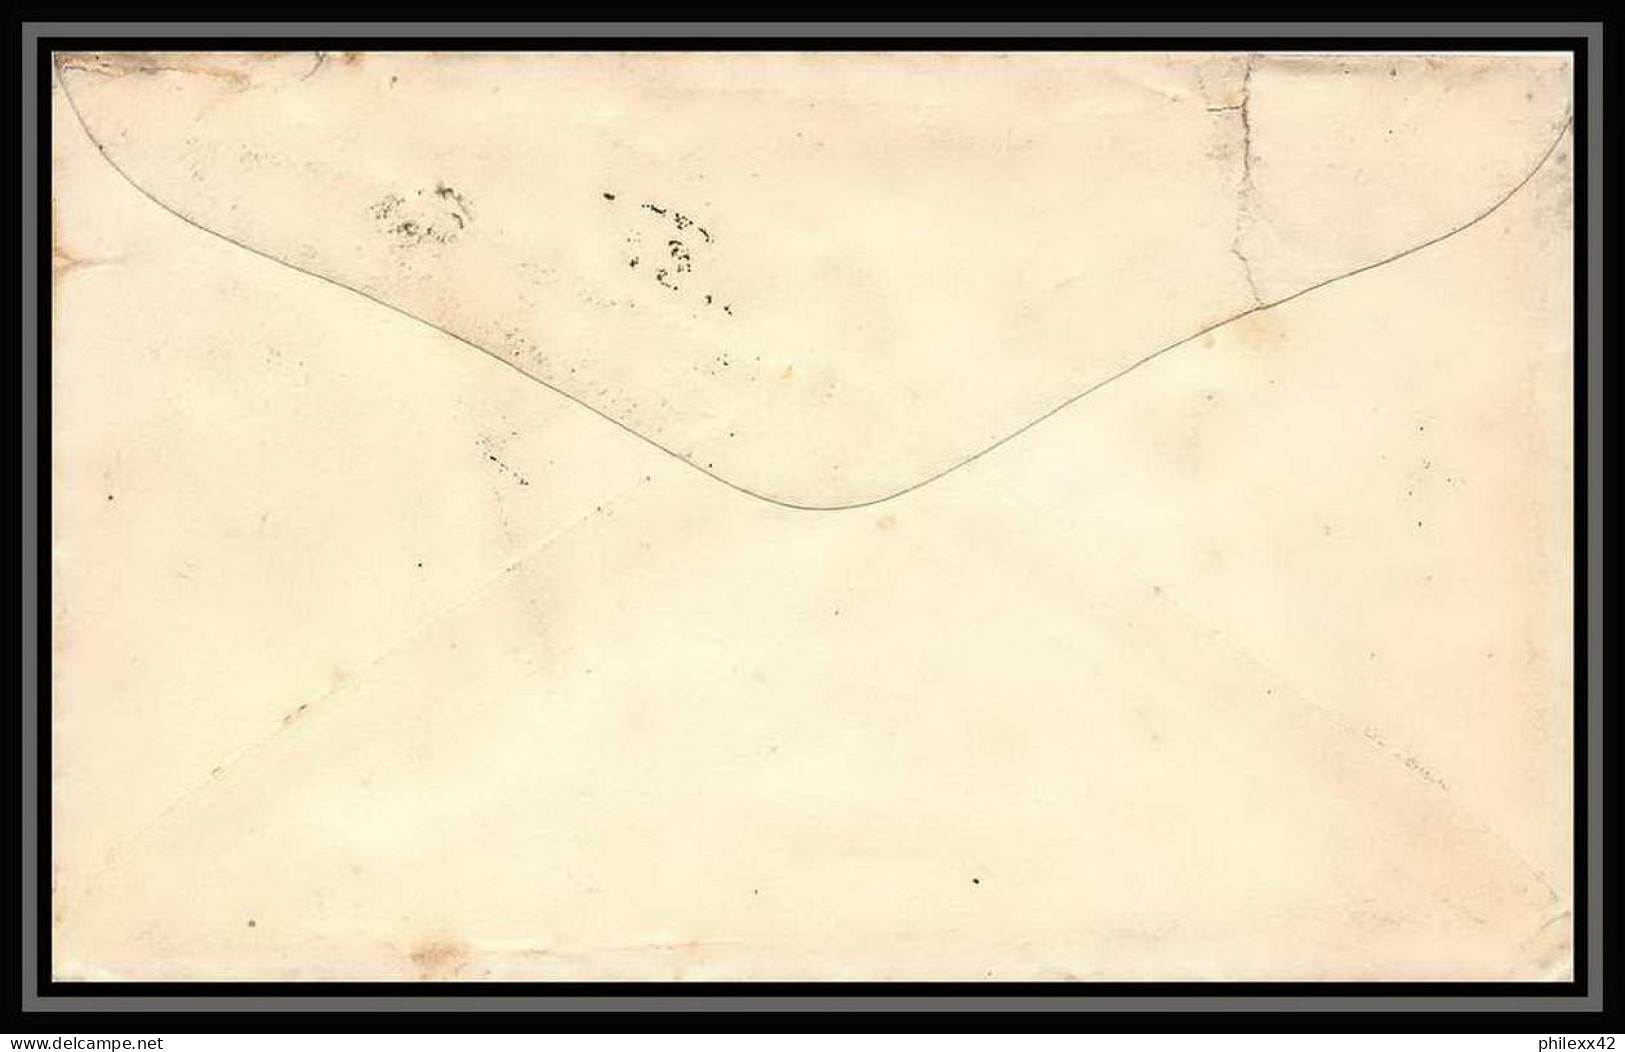 3295/ USA Entier Stationery Enveloppe (cover) 1902 Taxee Postage Due 3 Cents  - 1901-20